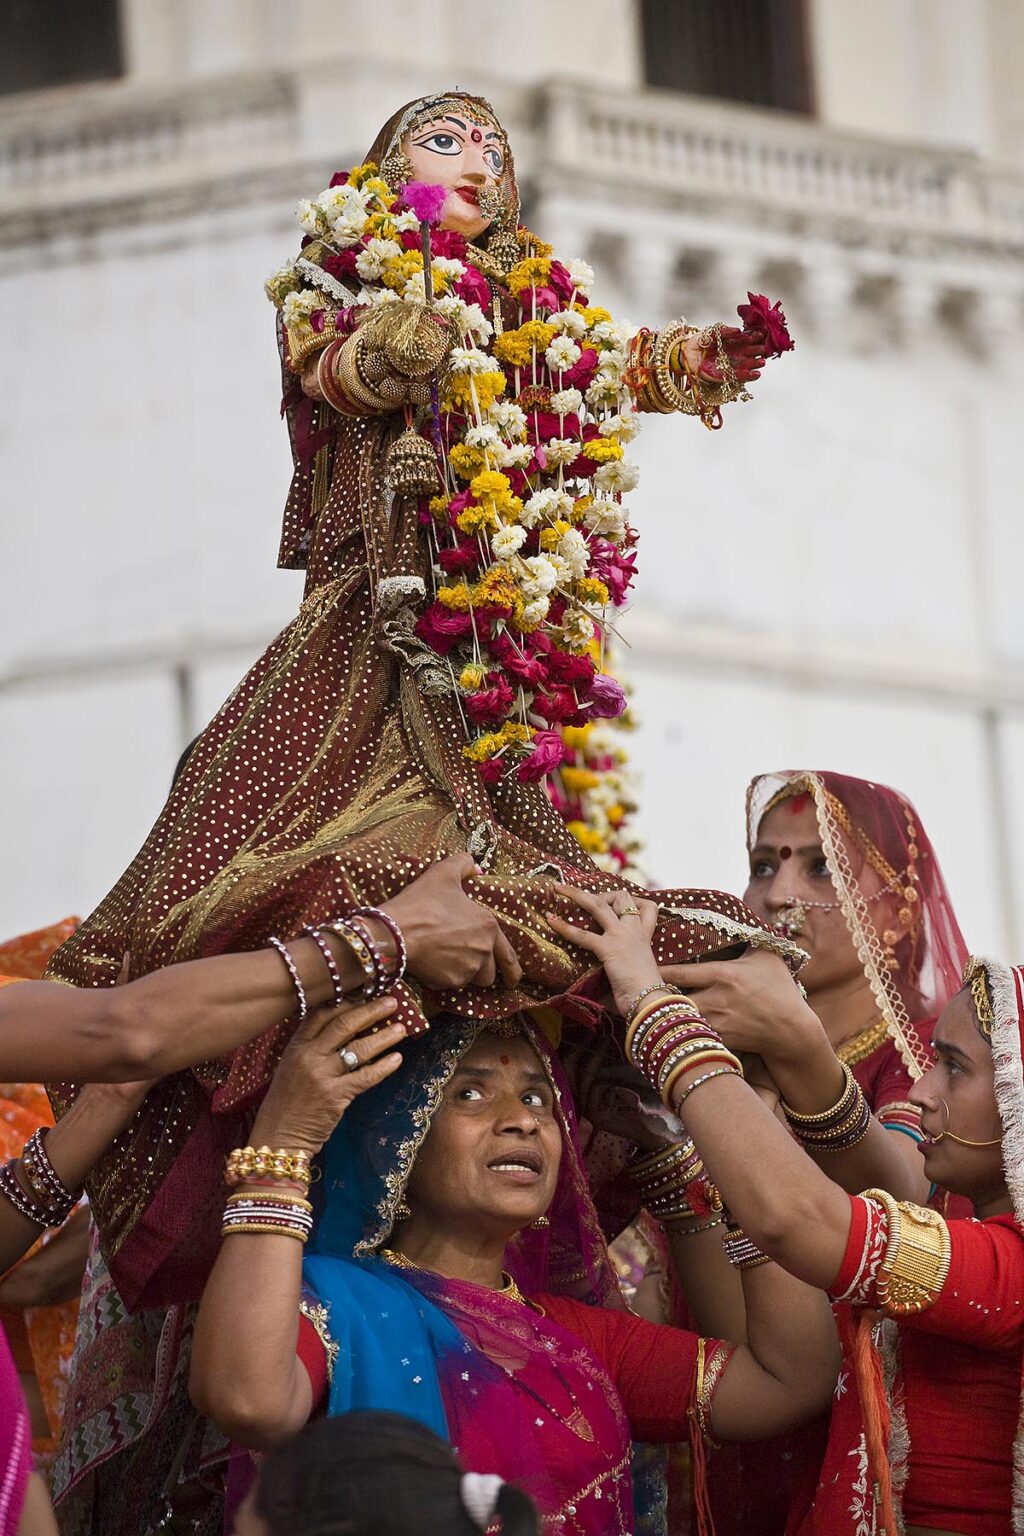 A Rajasthani woman carries an effigy of Shiva's wife Parvati at the GANGUR FESTIVAL also known as the MEWAR FESTIVAL in UDAIPUR - RAJASTHAN, INDIA